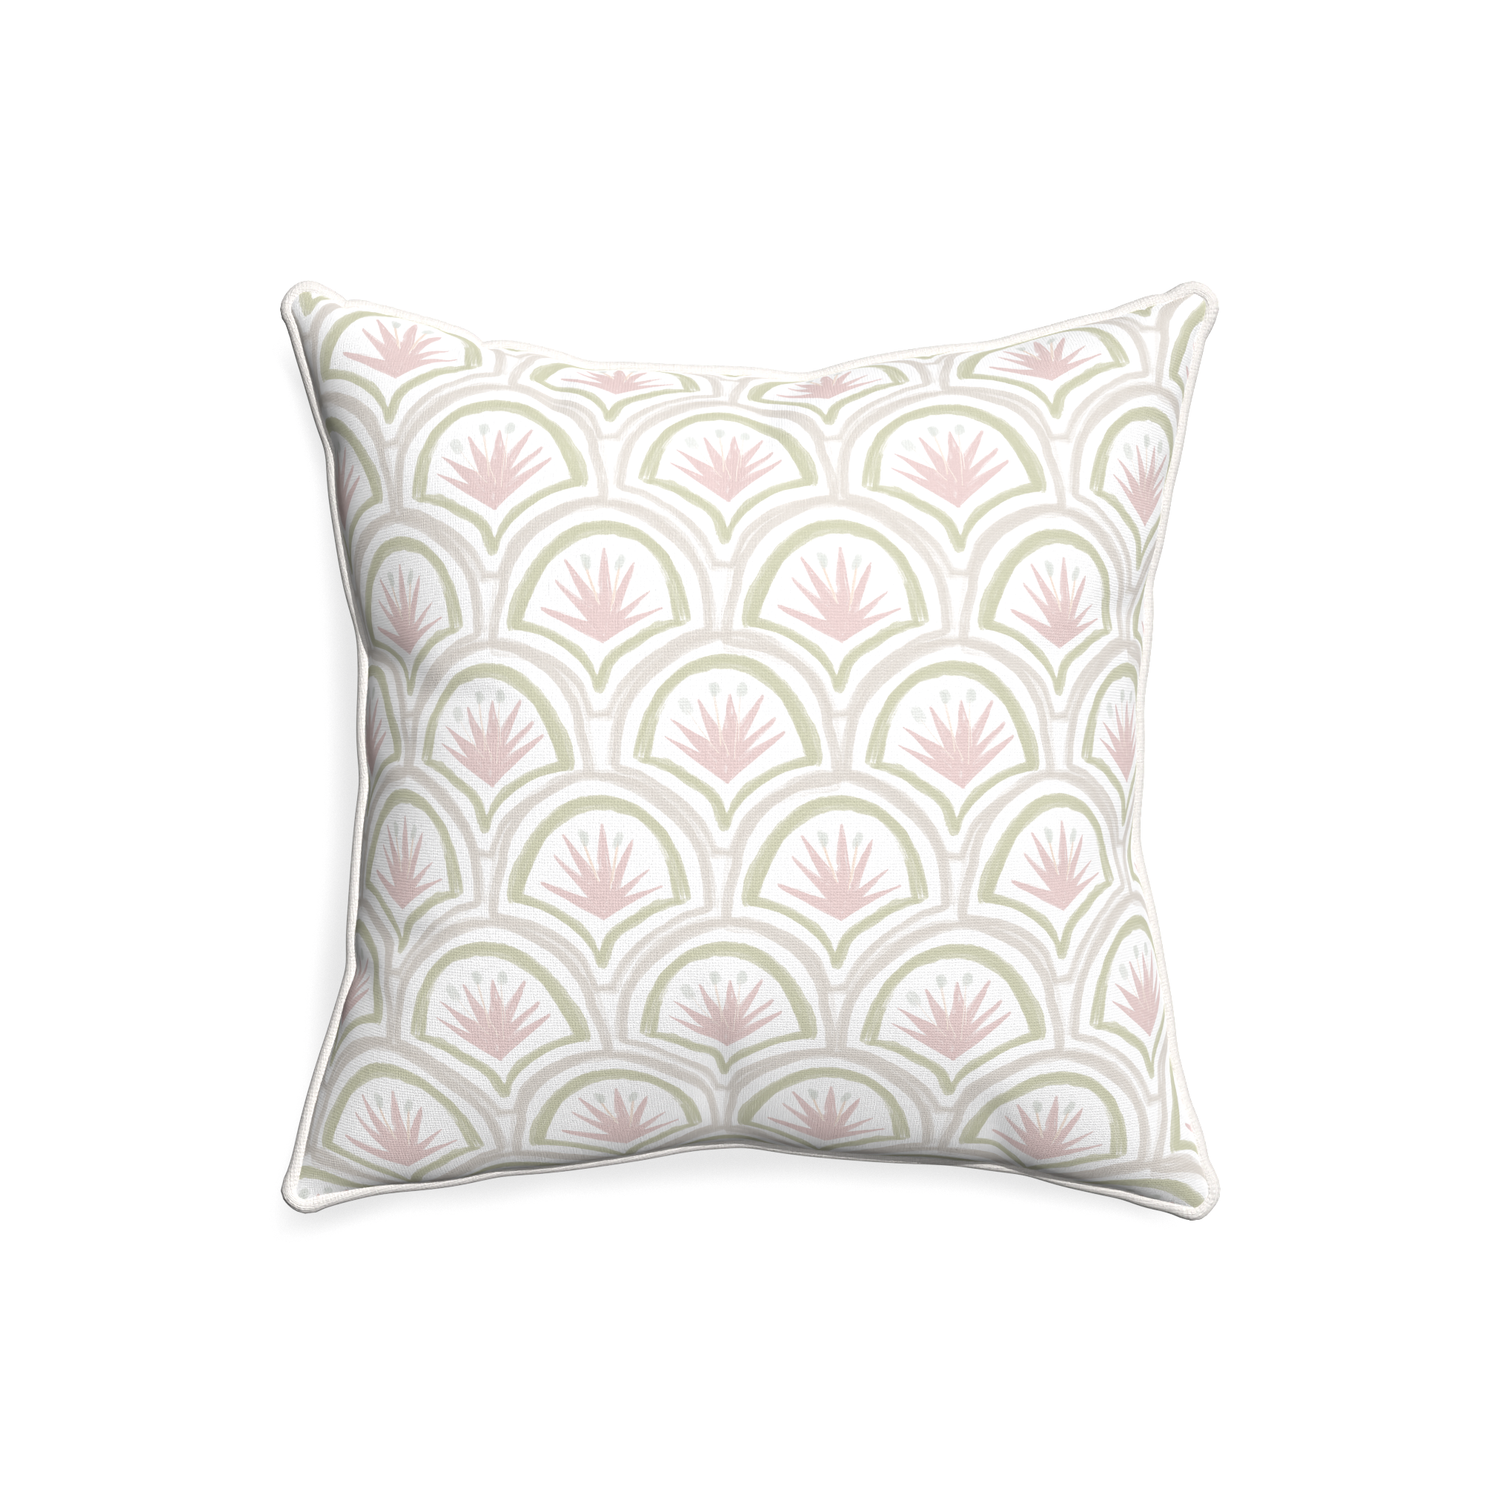 20-square thatcher rose custom pillow with snow piping on white background